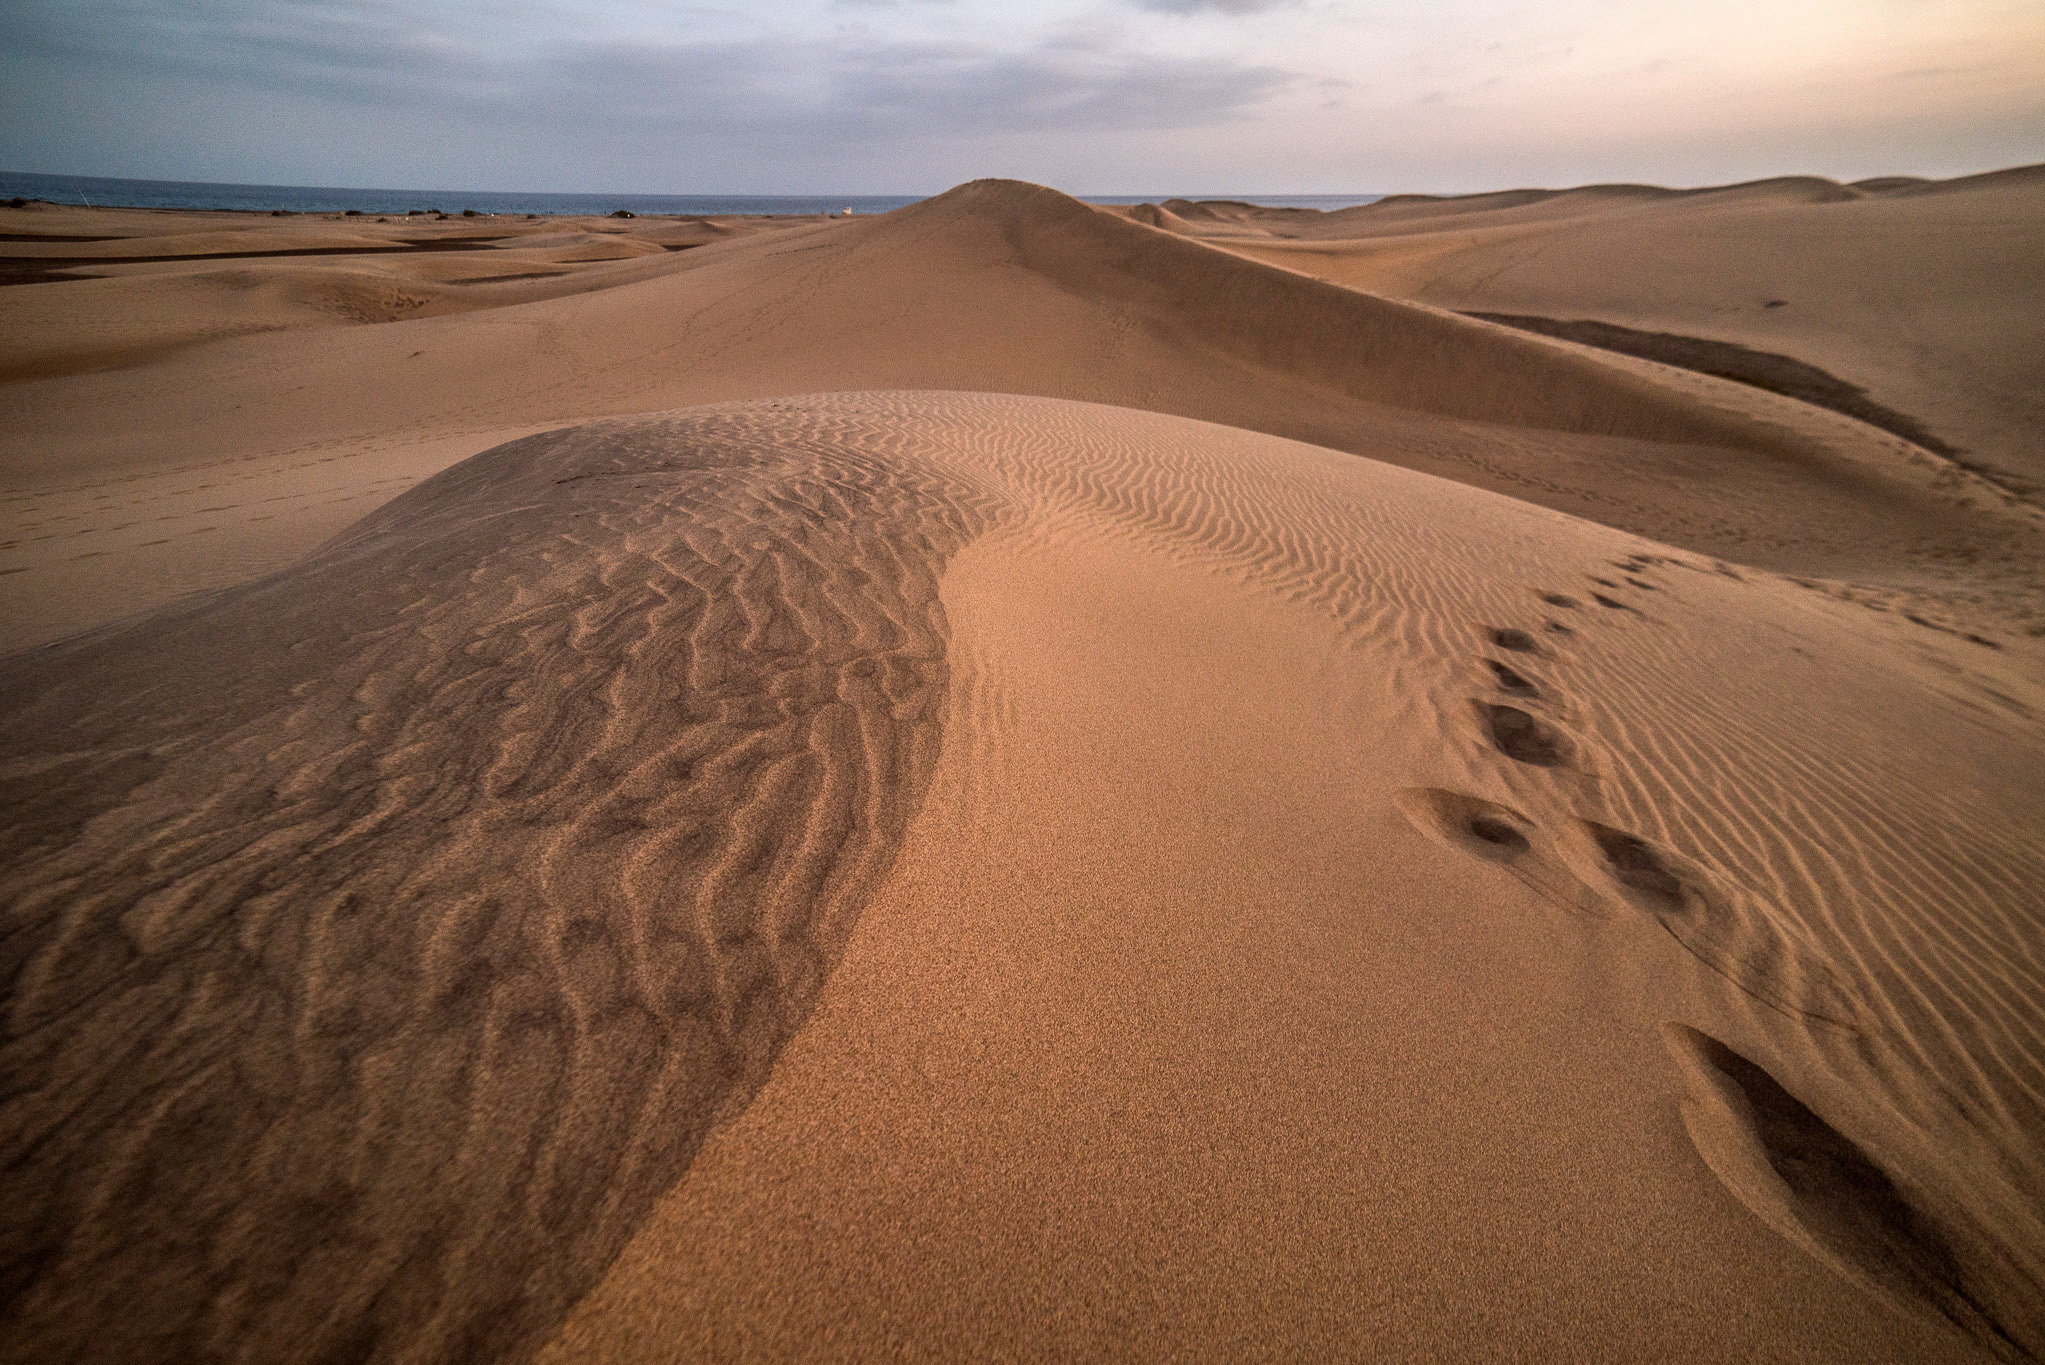 What to Photograph in the Canary Islands